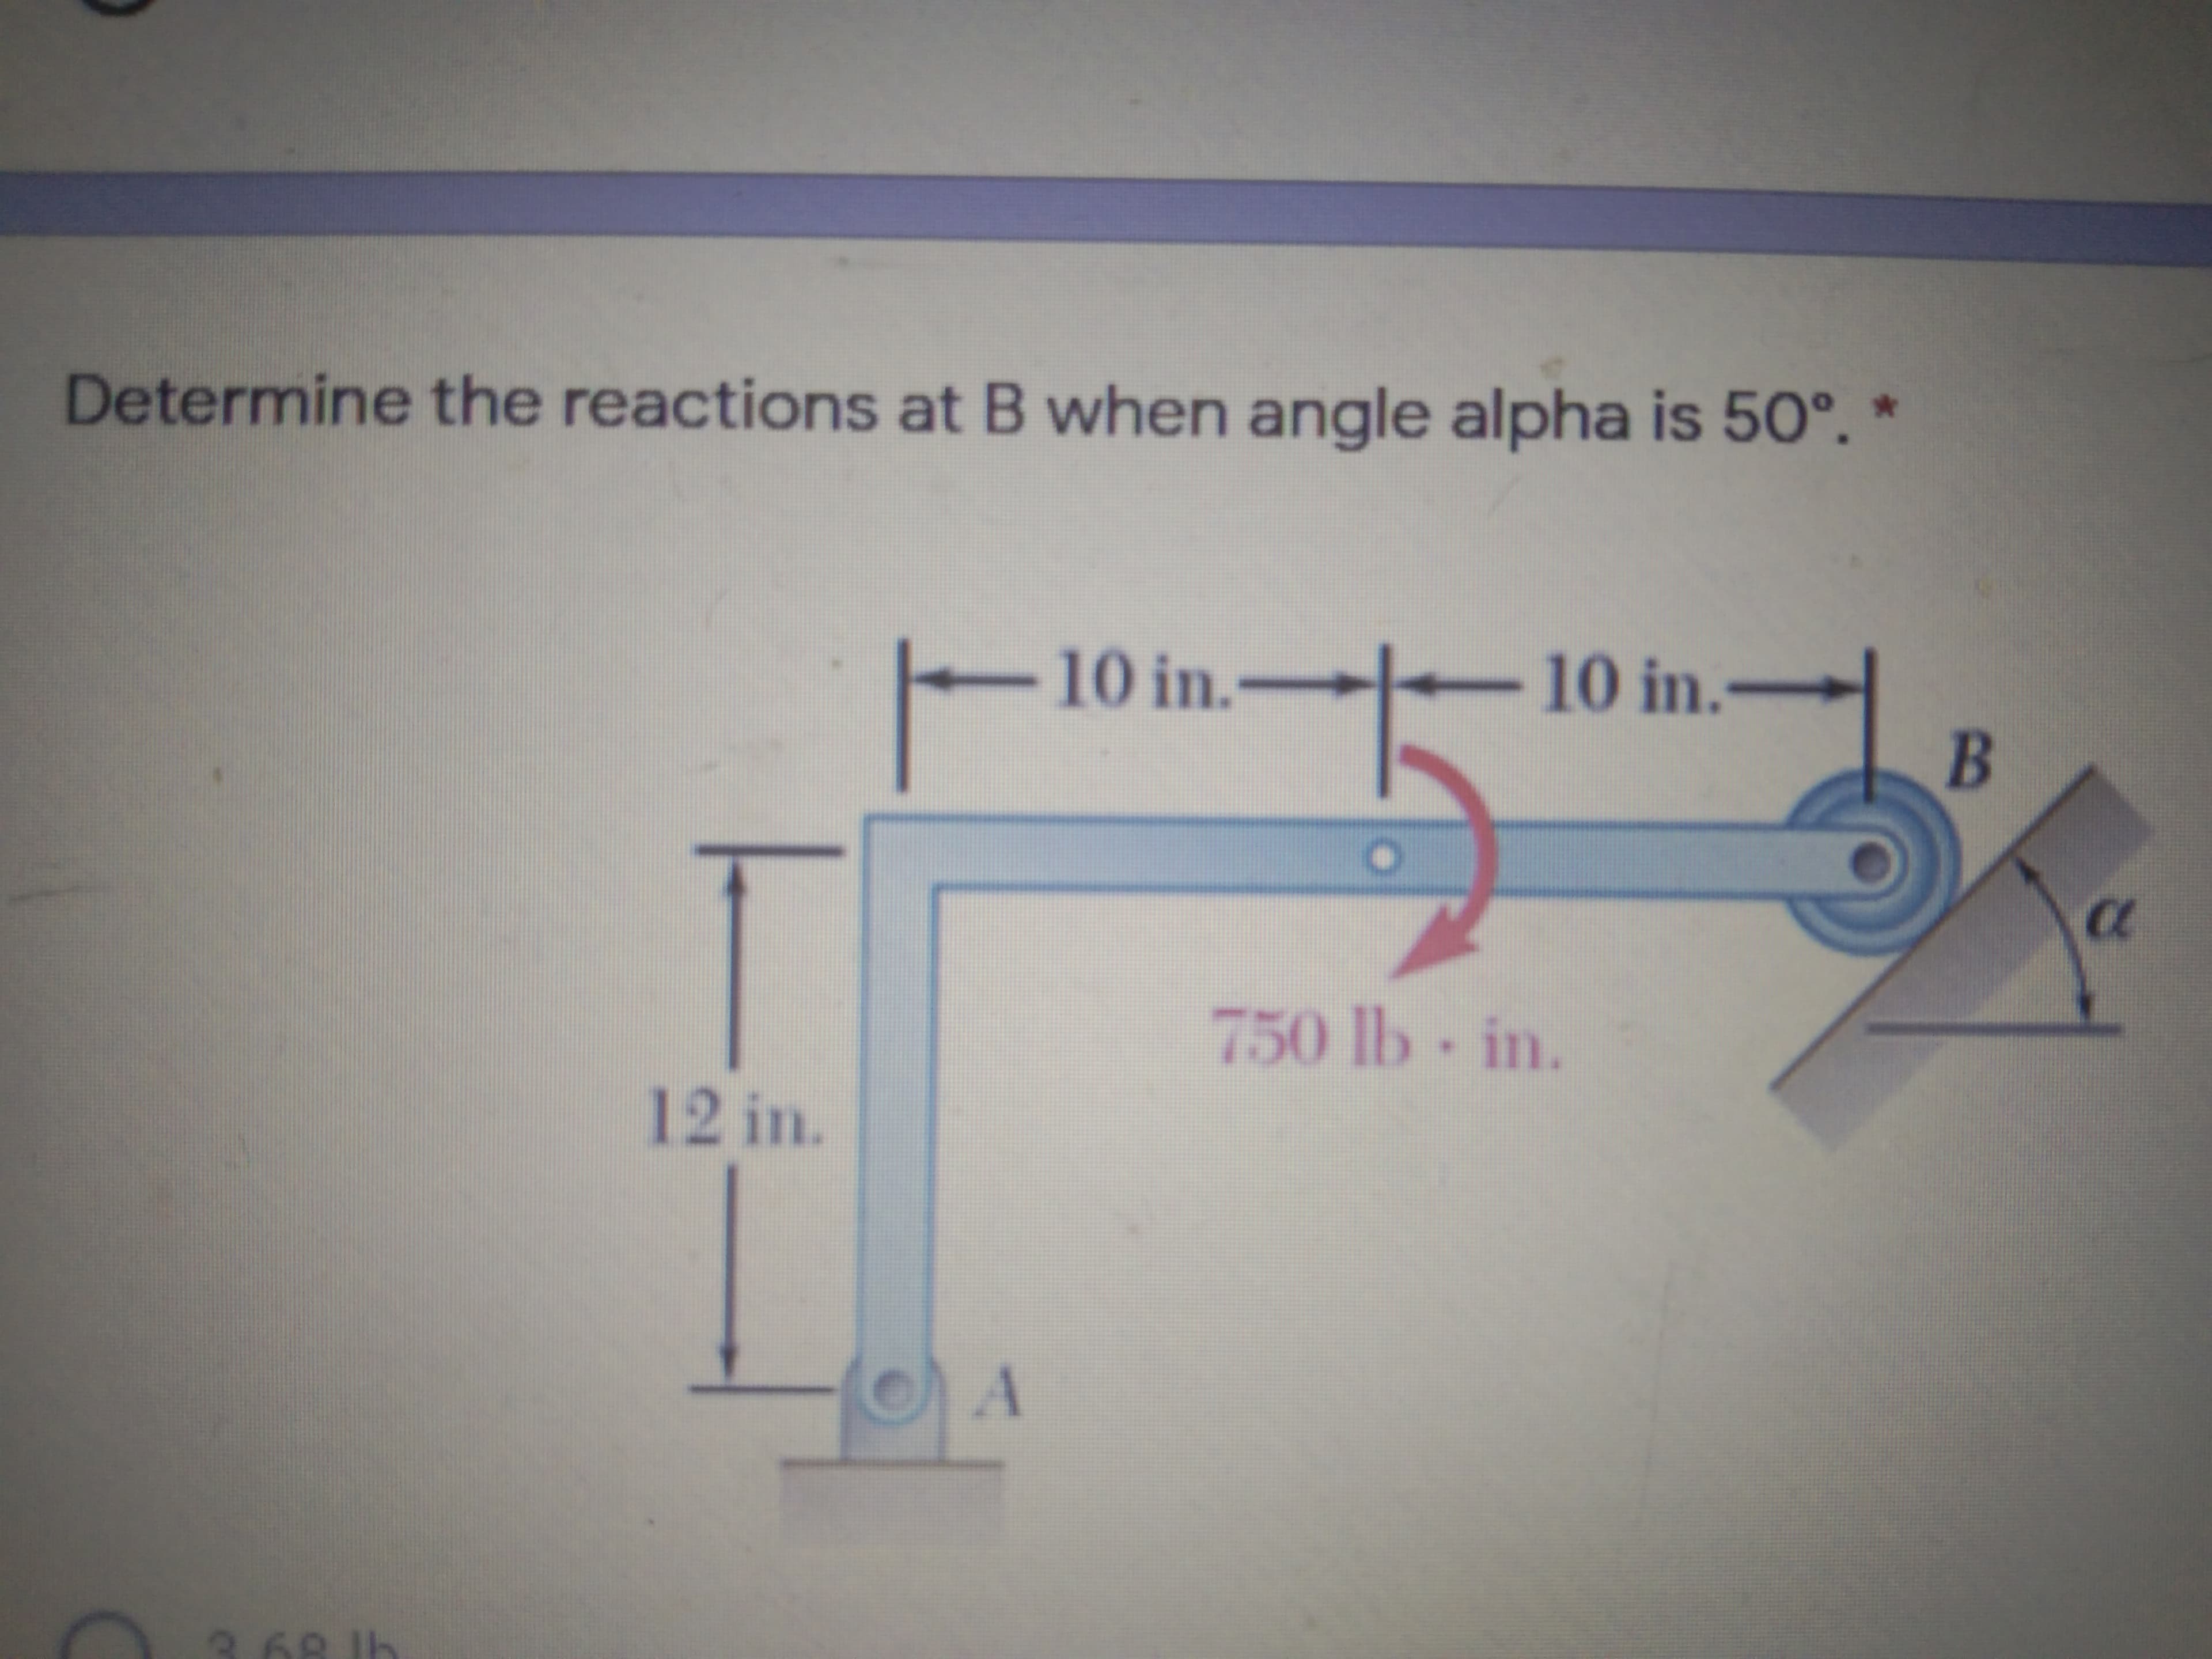 Determine the reactions at B when angle alpha is 50°. *
